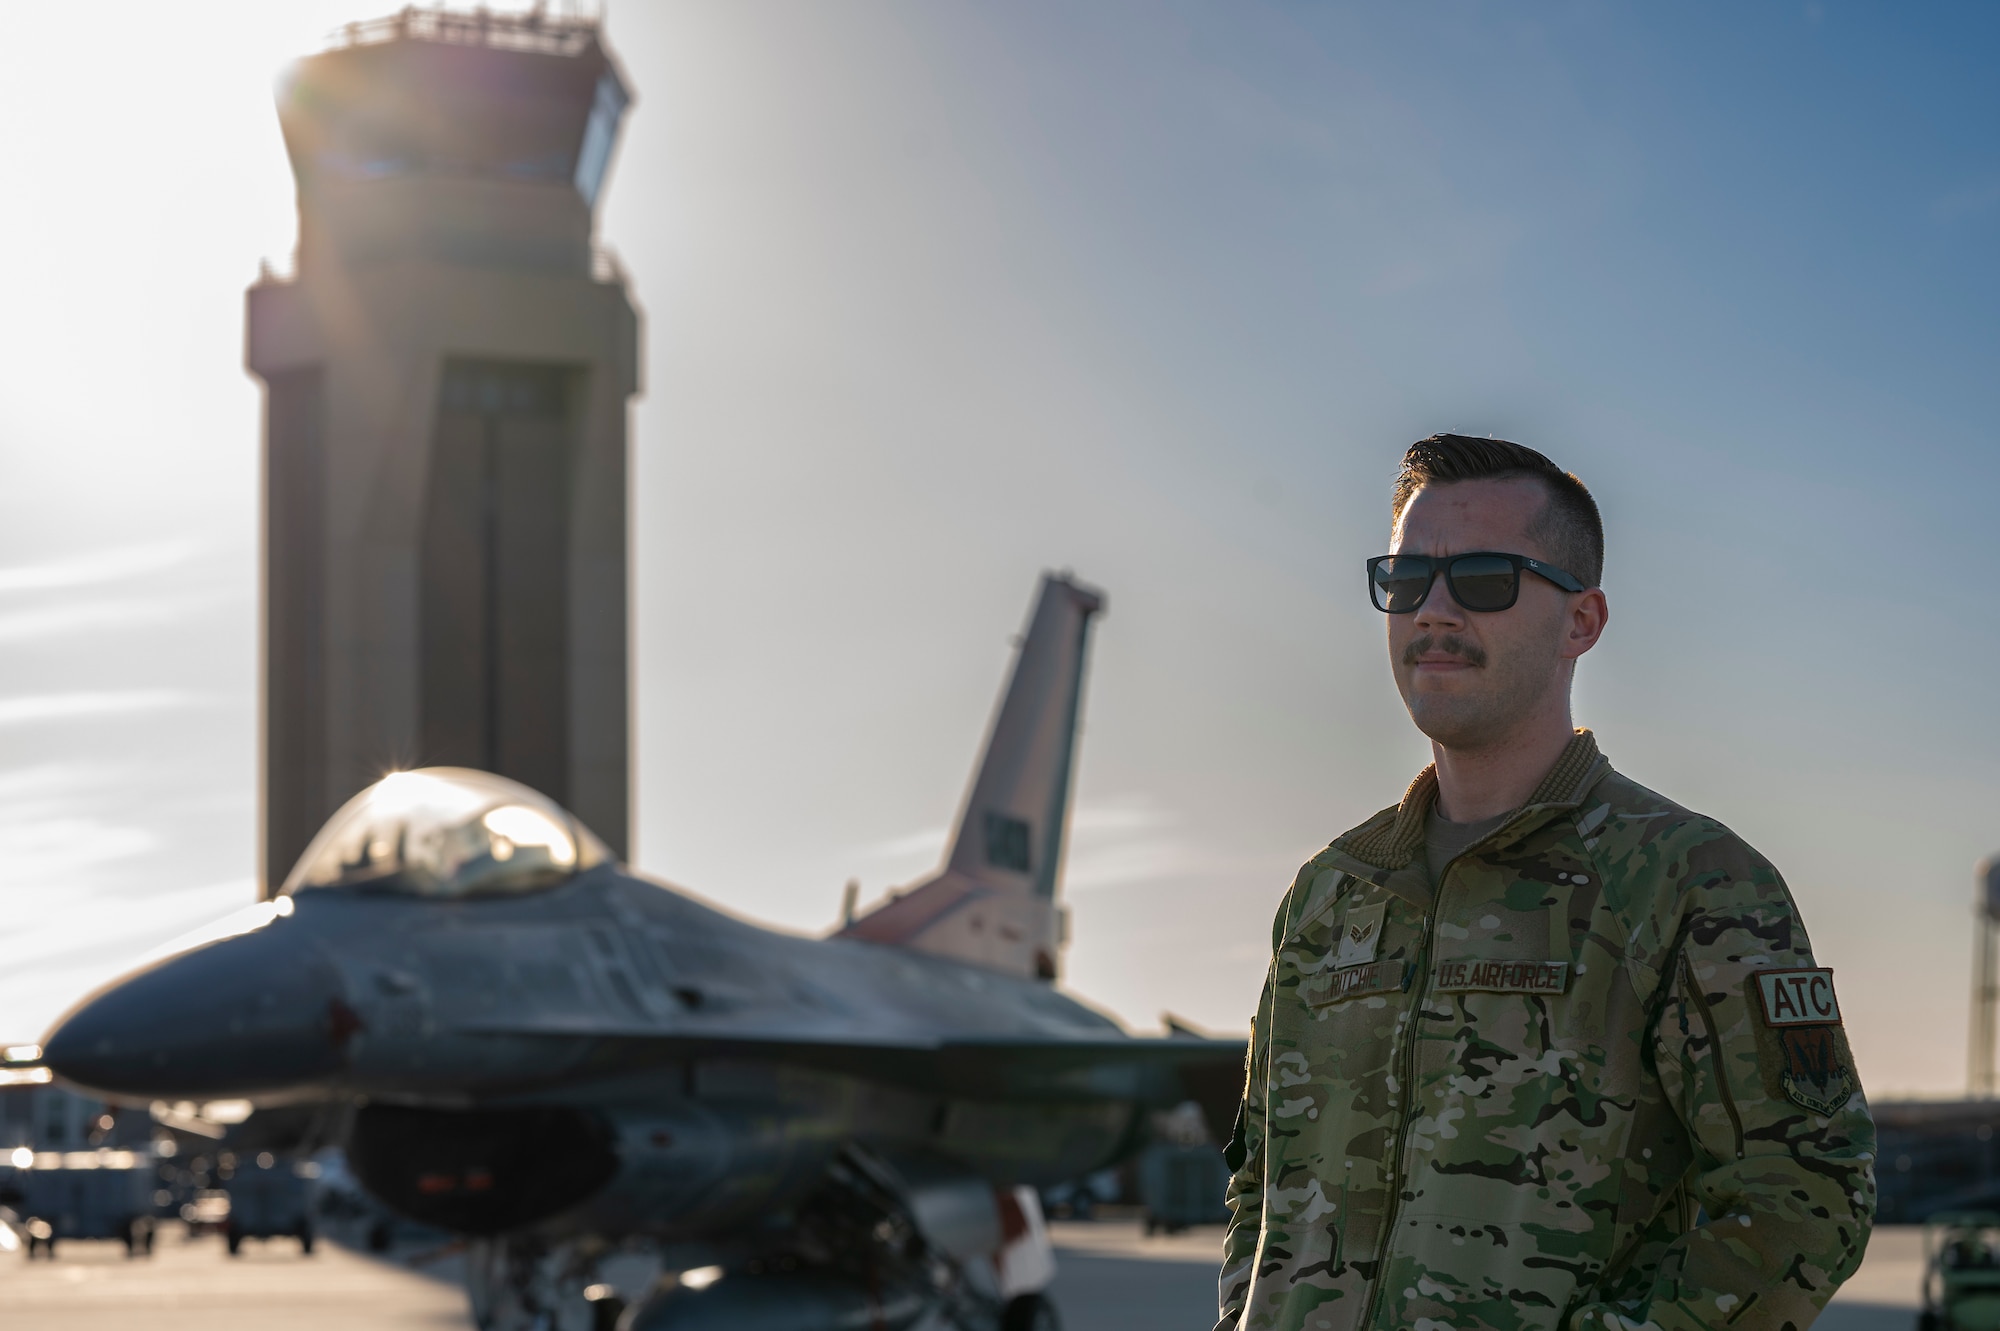 Airman poses in front of the air traffic control tower